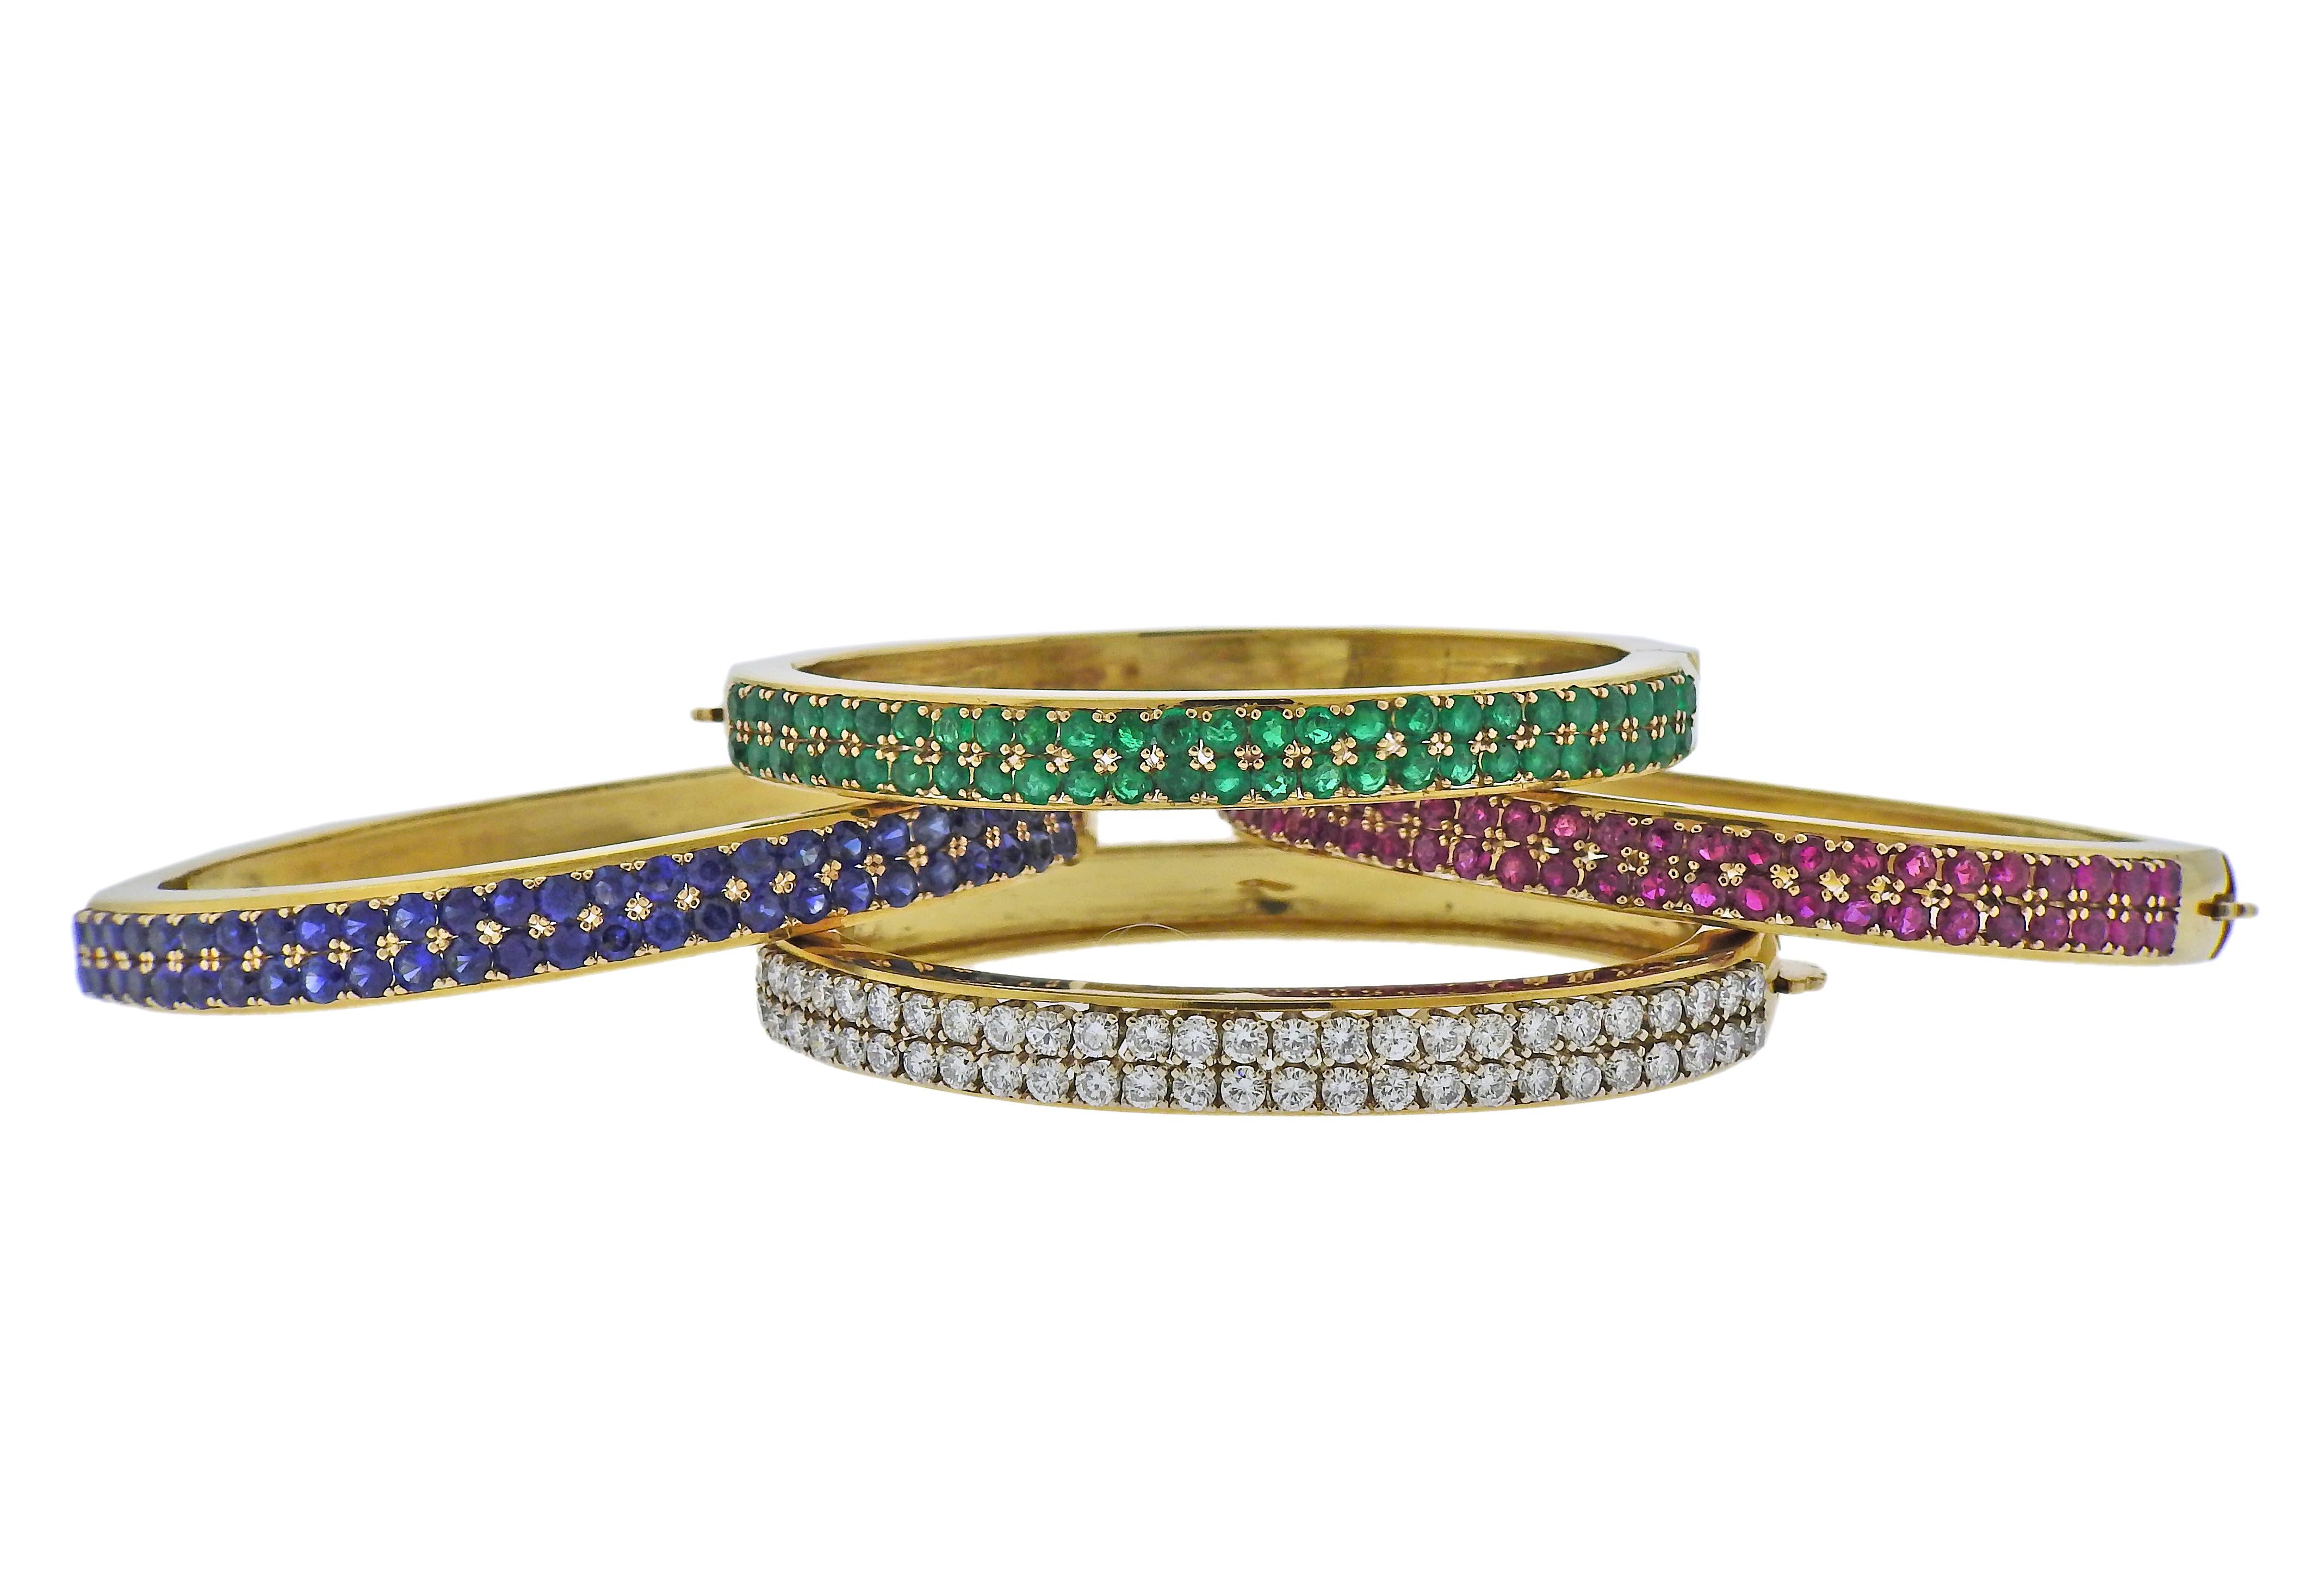 Set of four 18k gold bangle bracelets, featuring sapphires, rubies, emeralds and approx. 3.20ctw in diamonds. Each bracelet will fit approx. 6.75